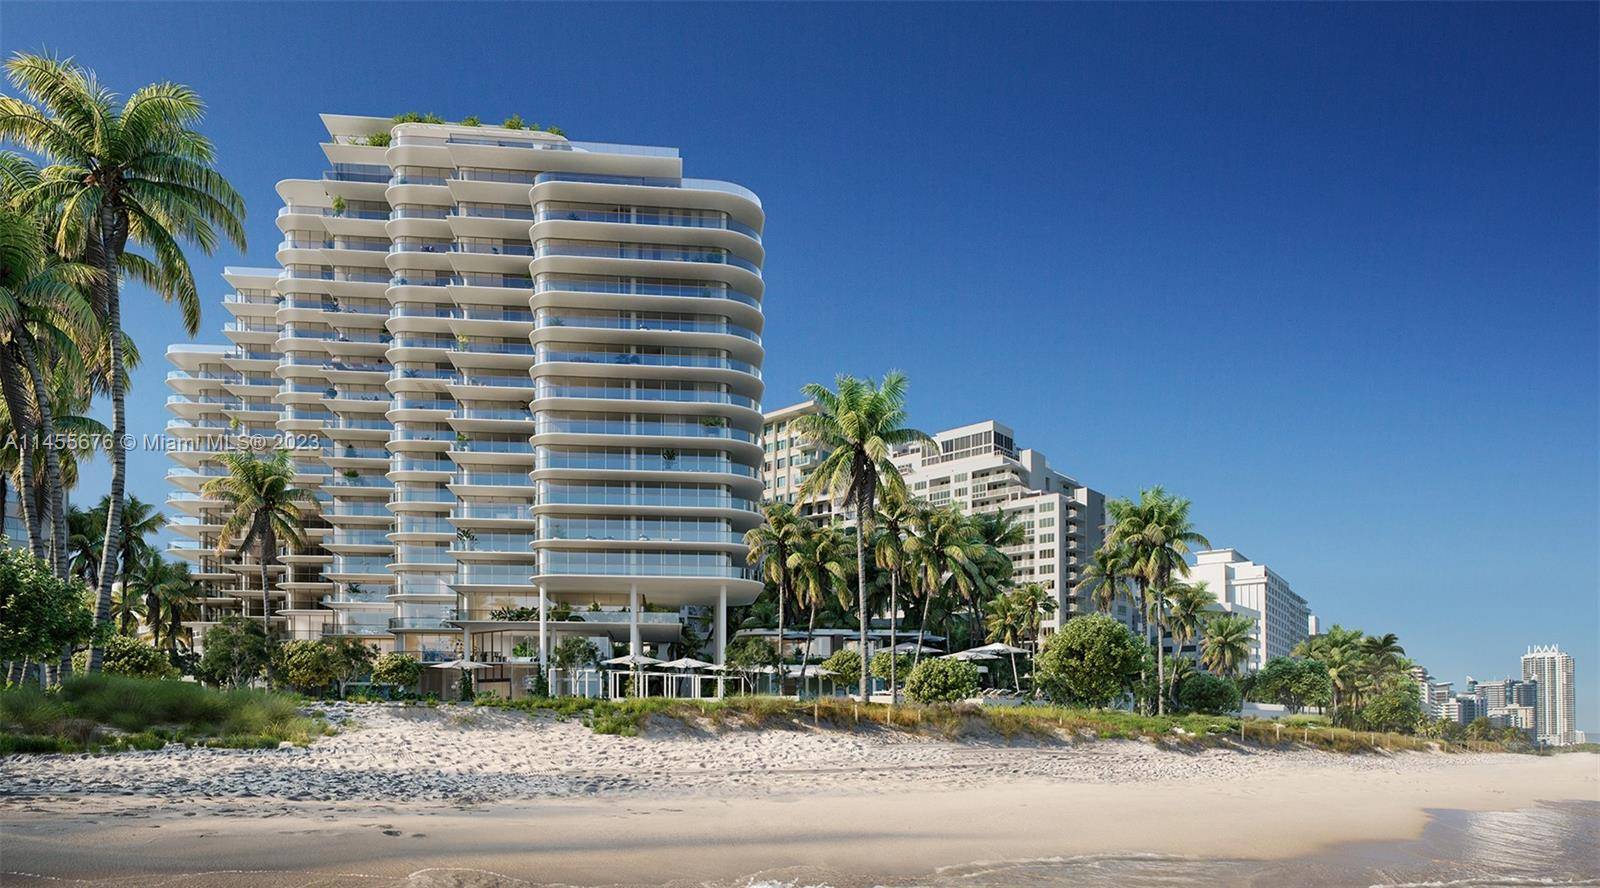 The Perigon Miami Beach the newest ON THE SAND property to be developed in Miami Beach at 5333 Collins Ave.